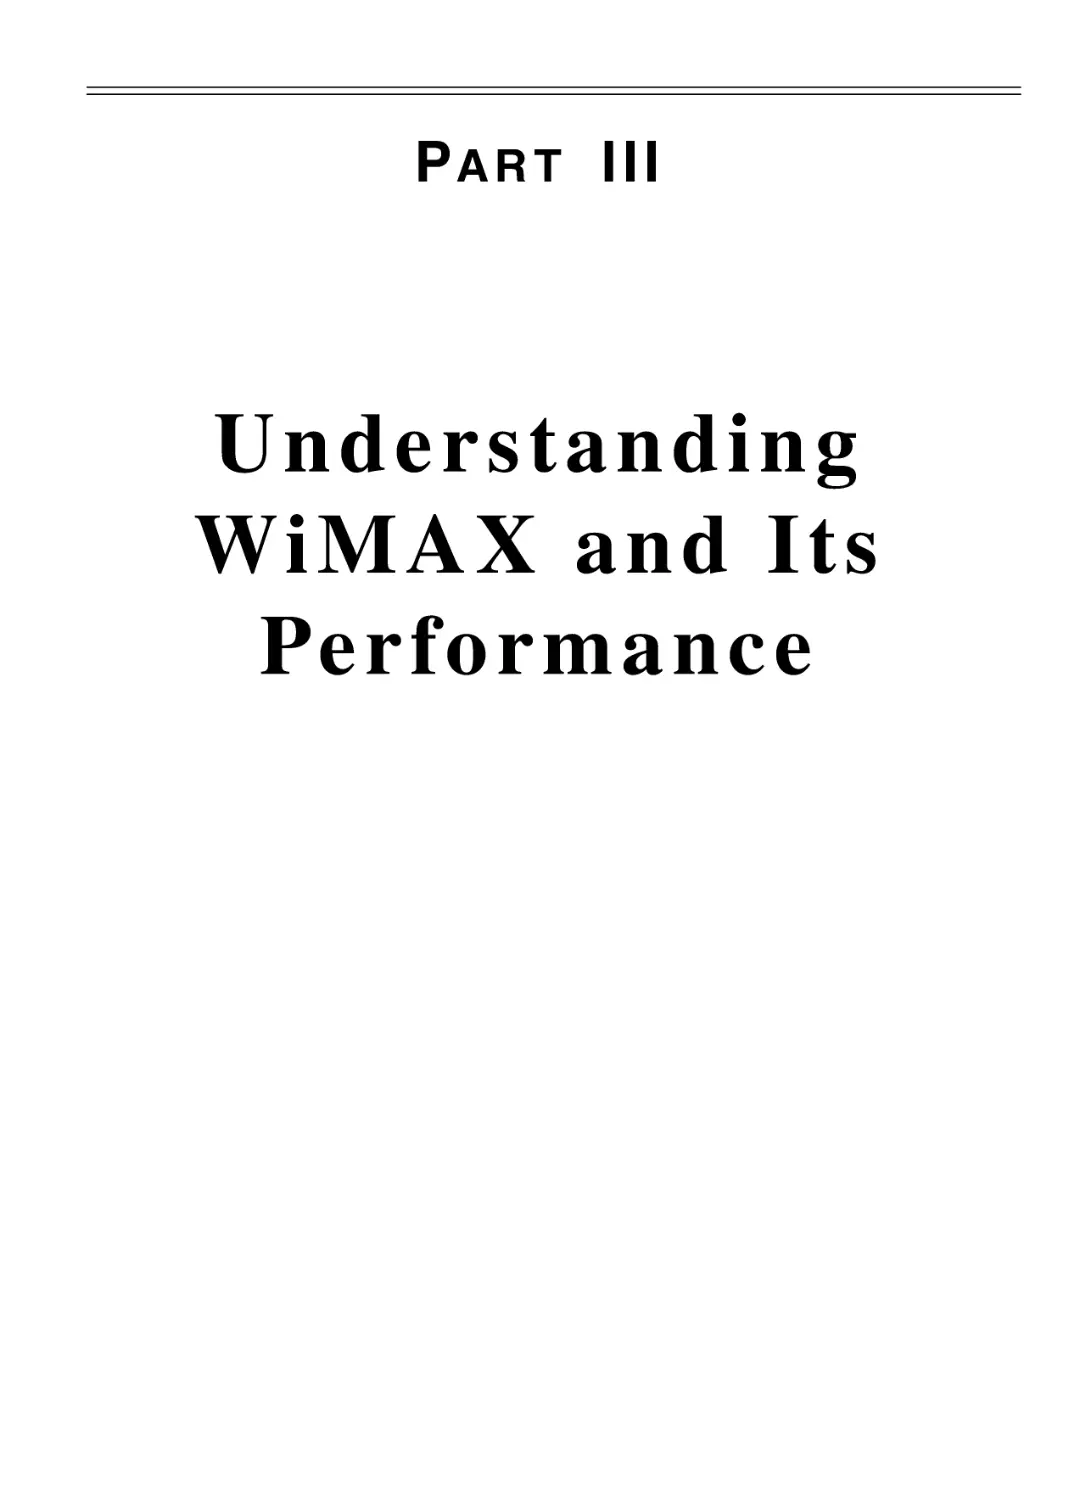 Understanding WiMAX and Its Performance